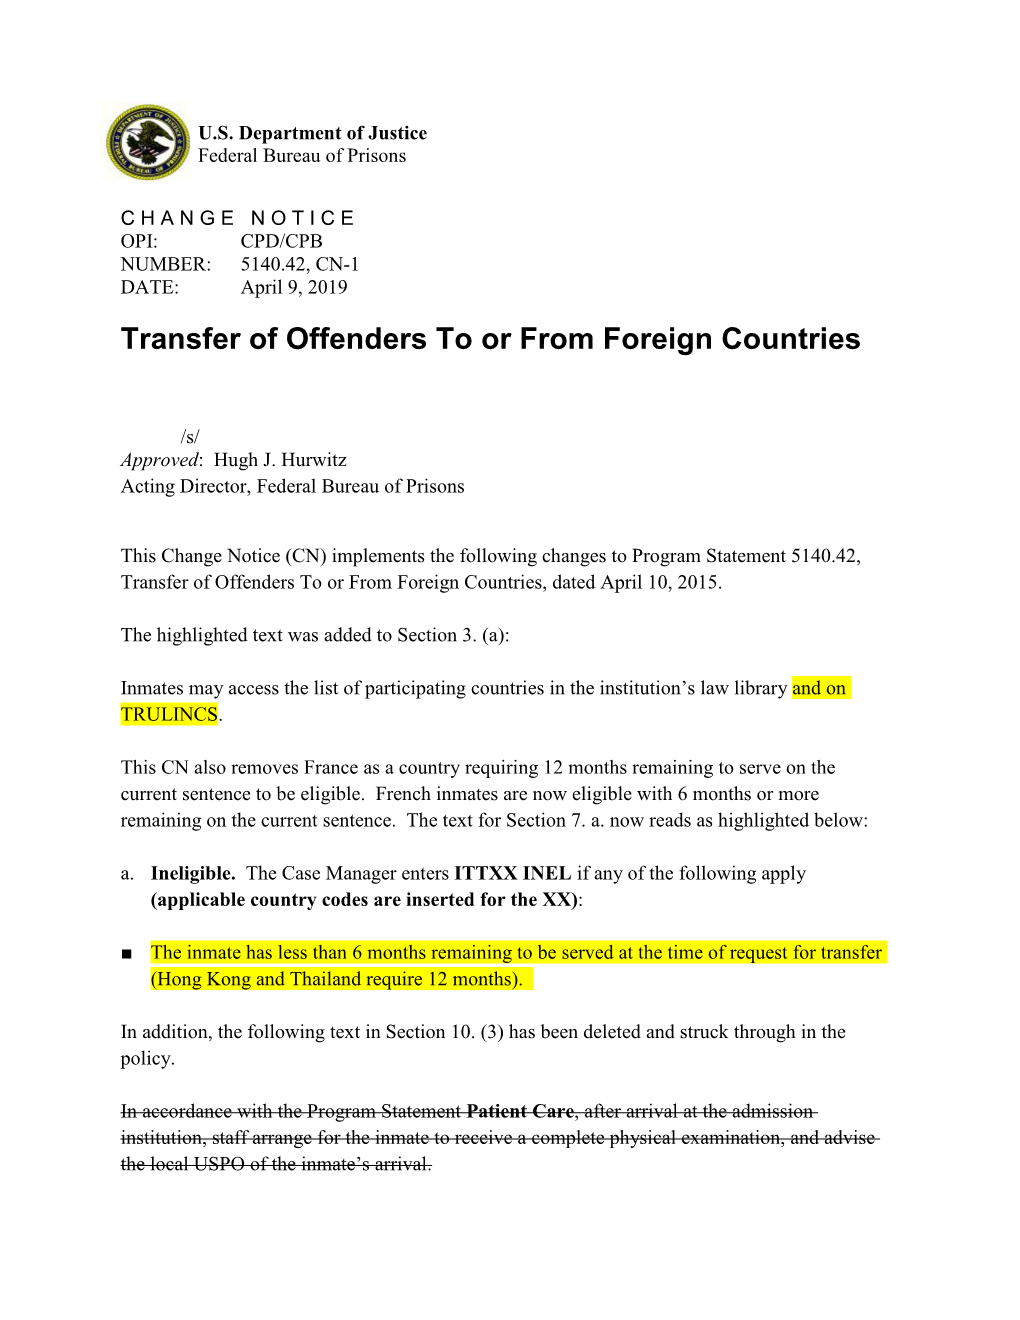 Transfer of Offenders to Or from Foreign Countries